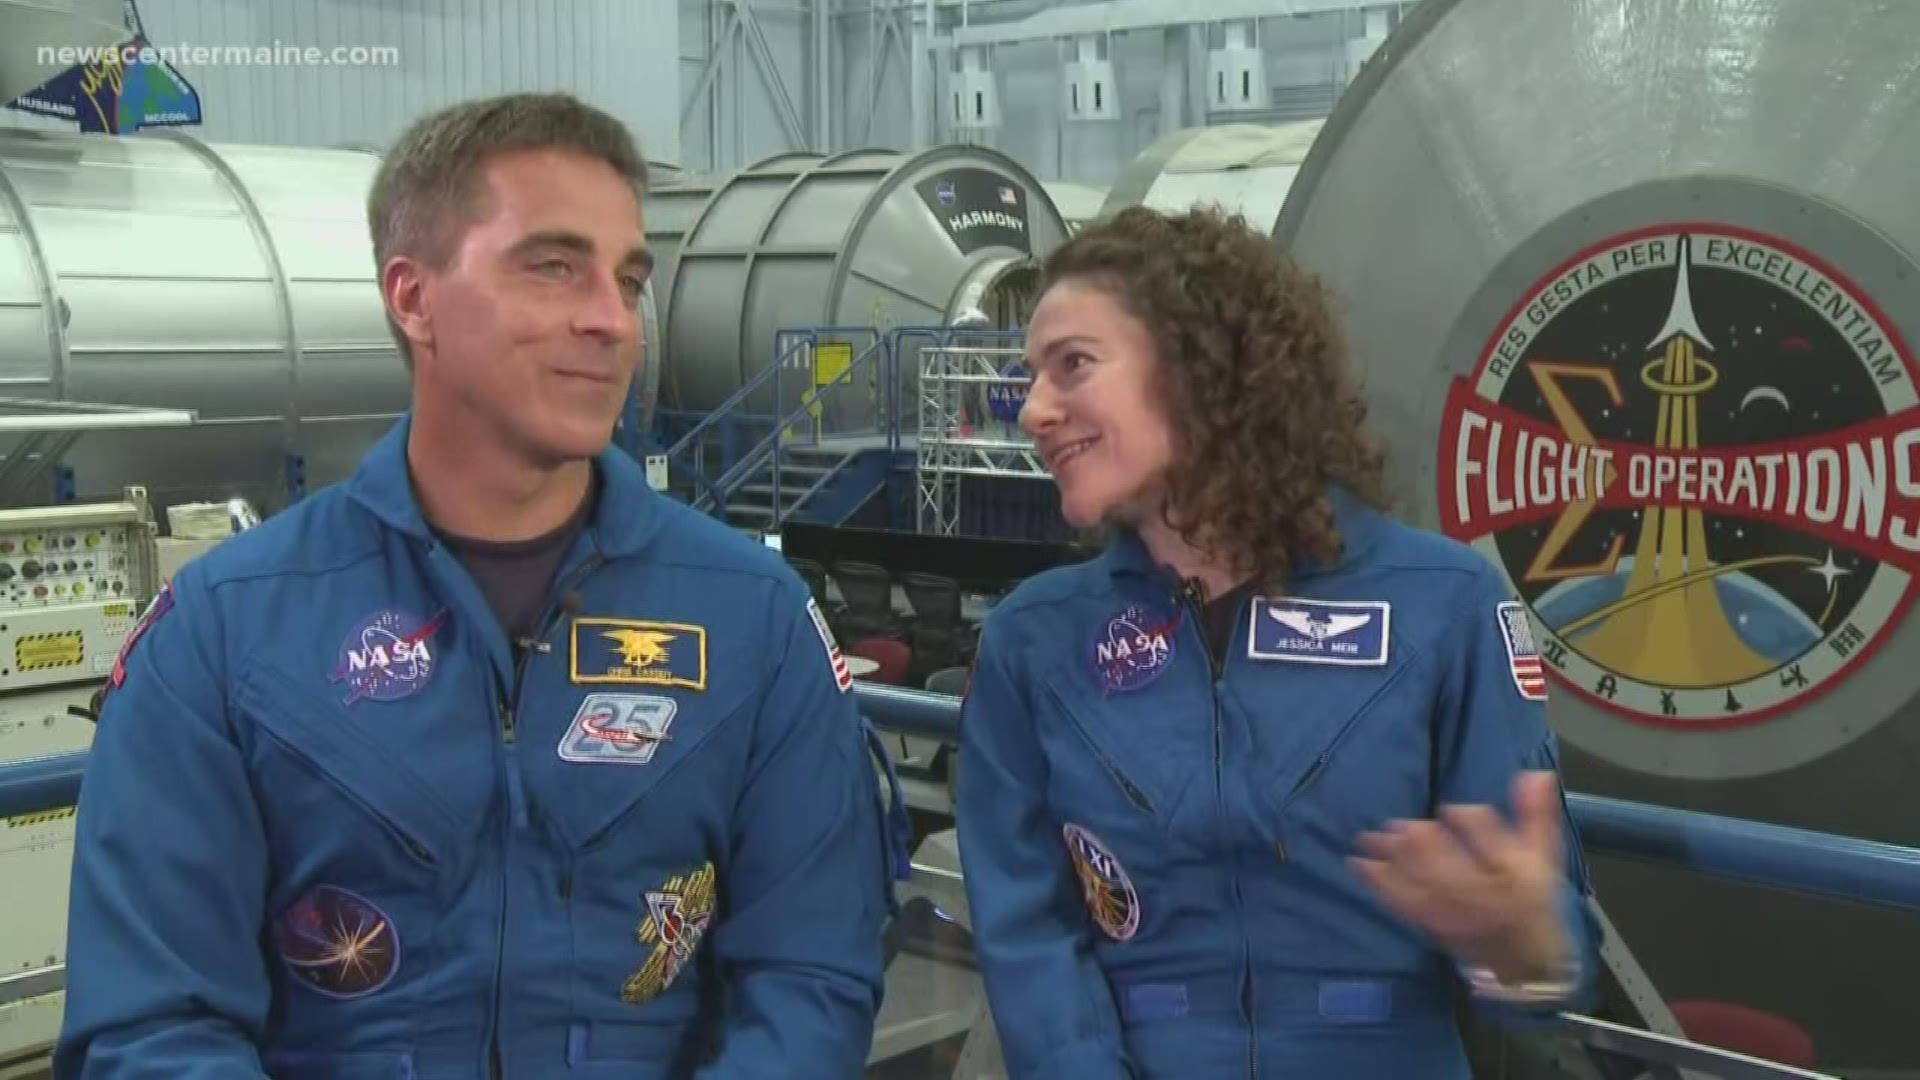 NASA has made it official that astronaut and York native Chris Cassidy will join Caribou native Jessical Meil at the International Space Station.